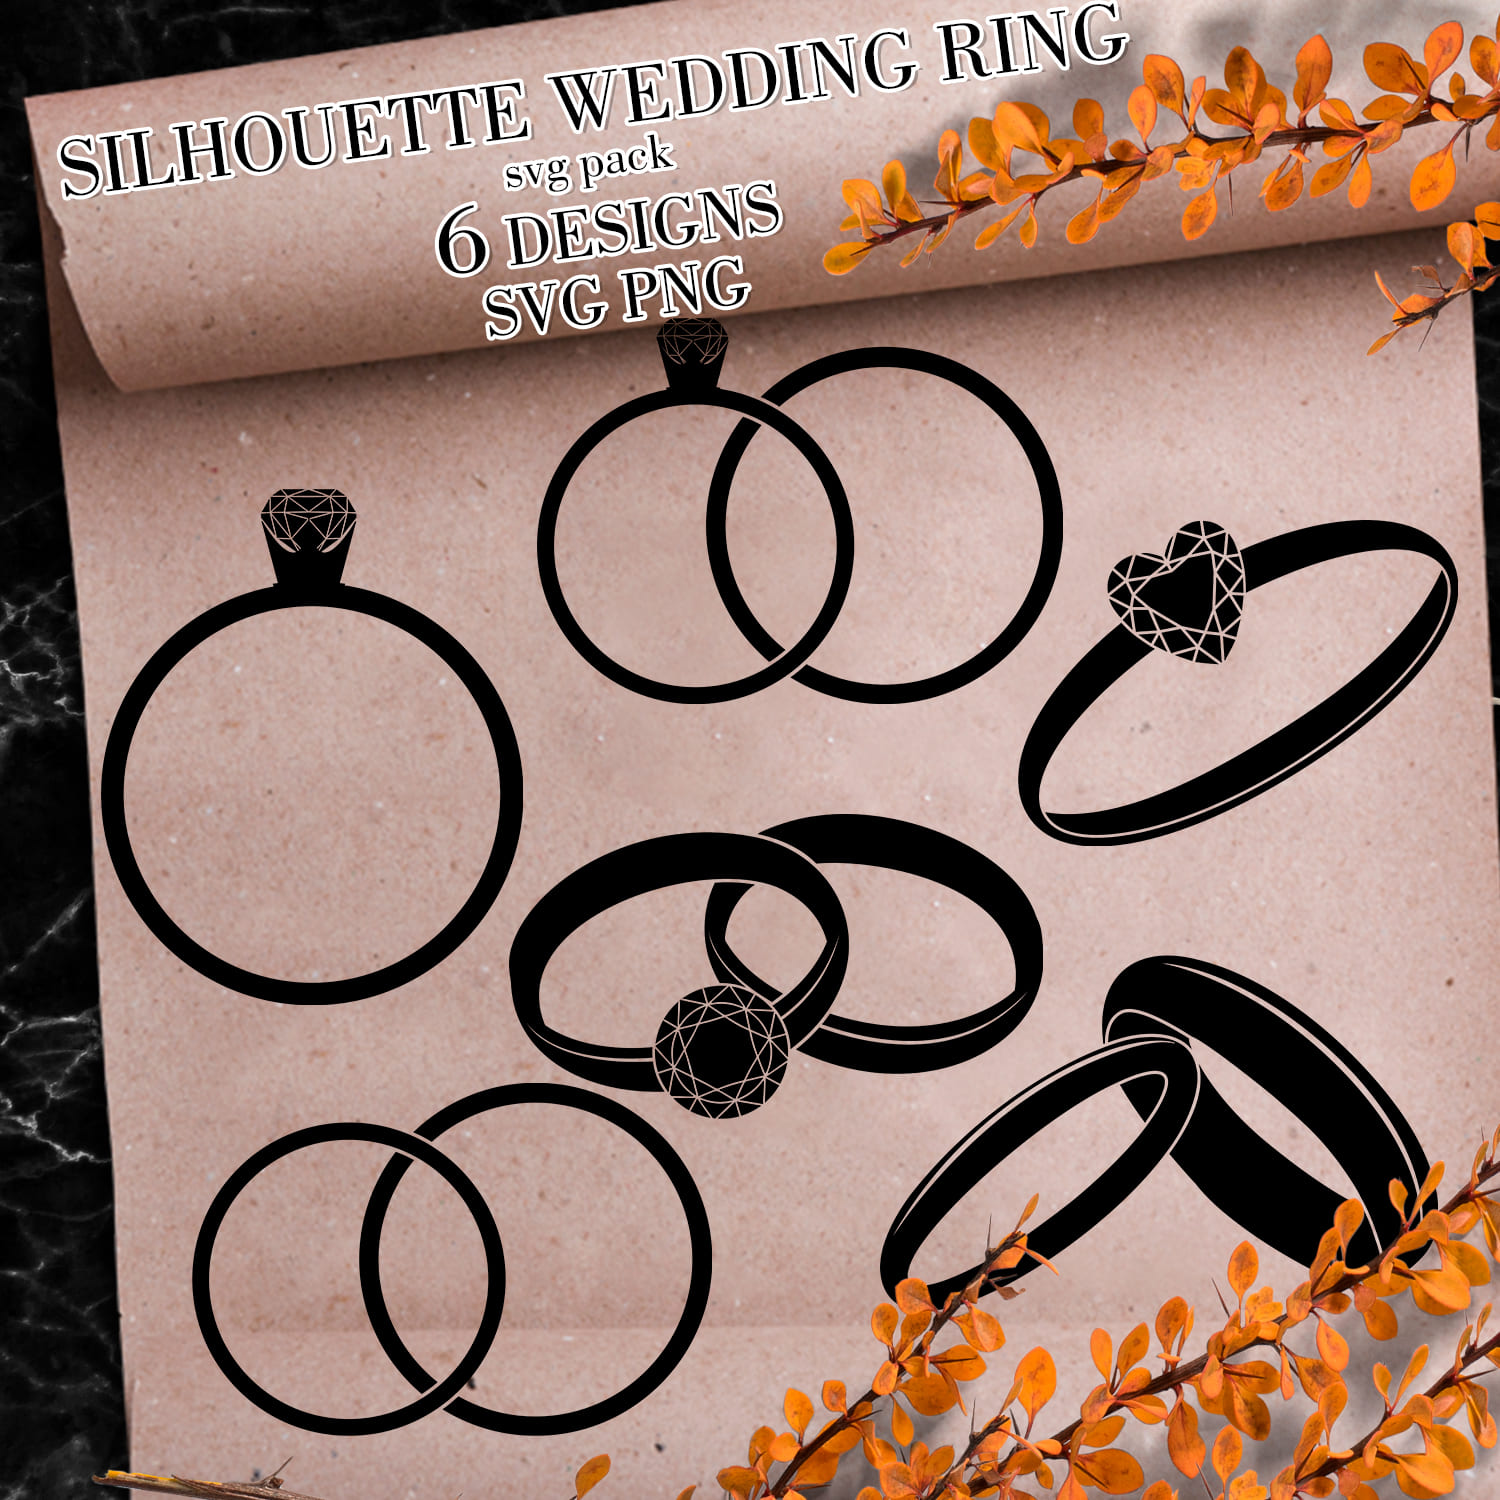 Silhouette Wedding Ring SVG - main image preview.